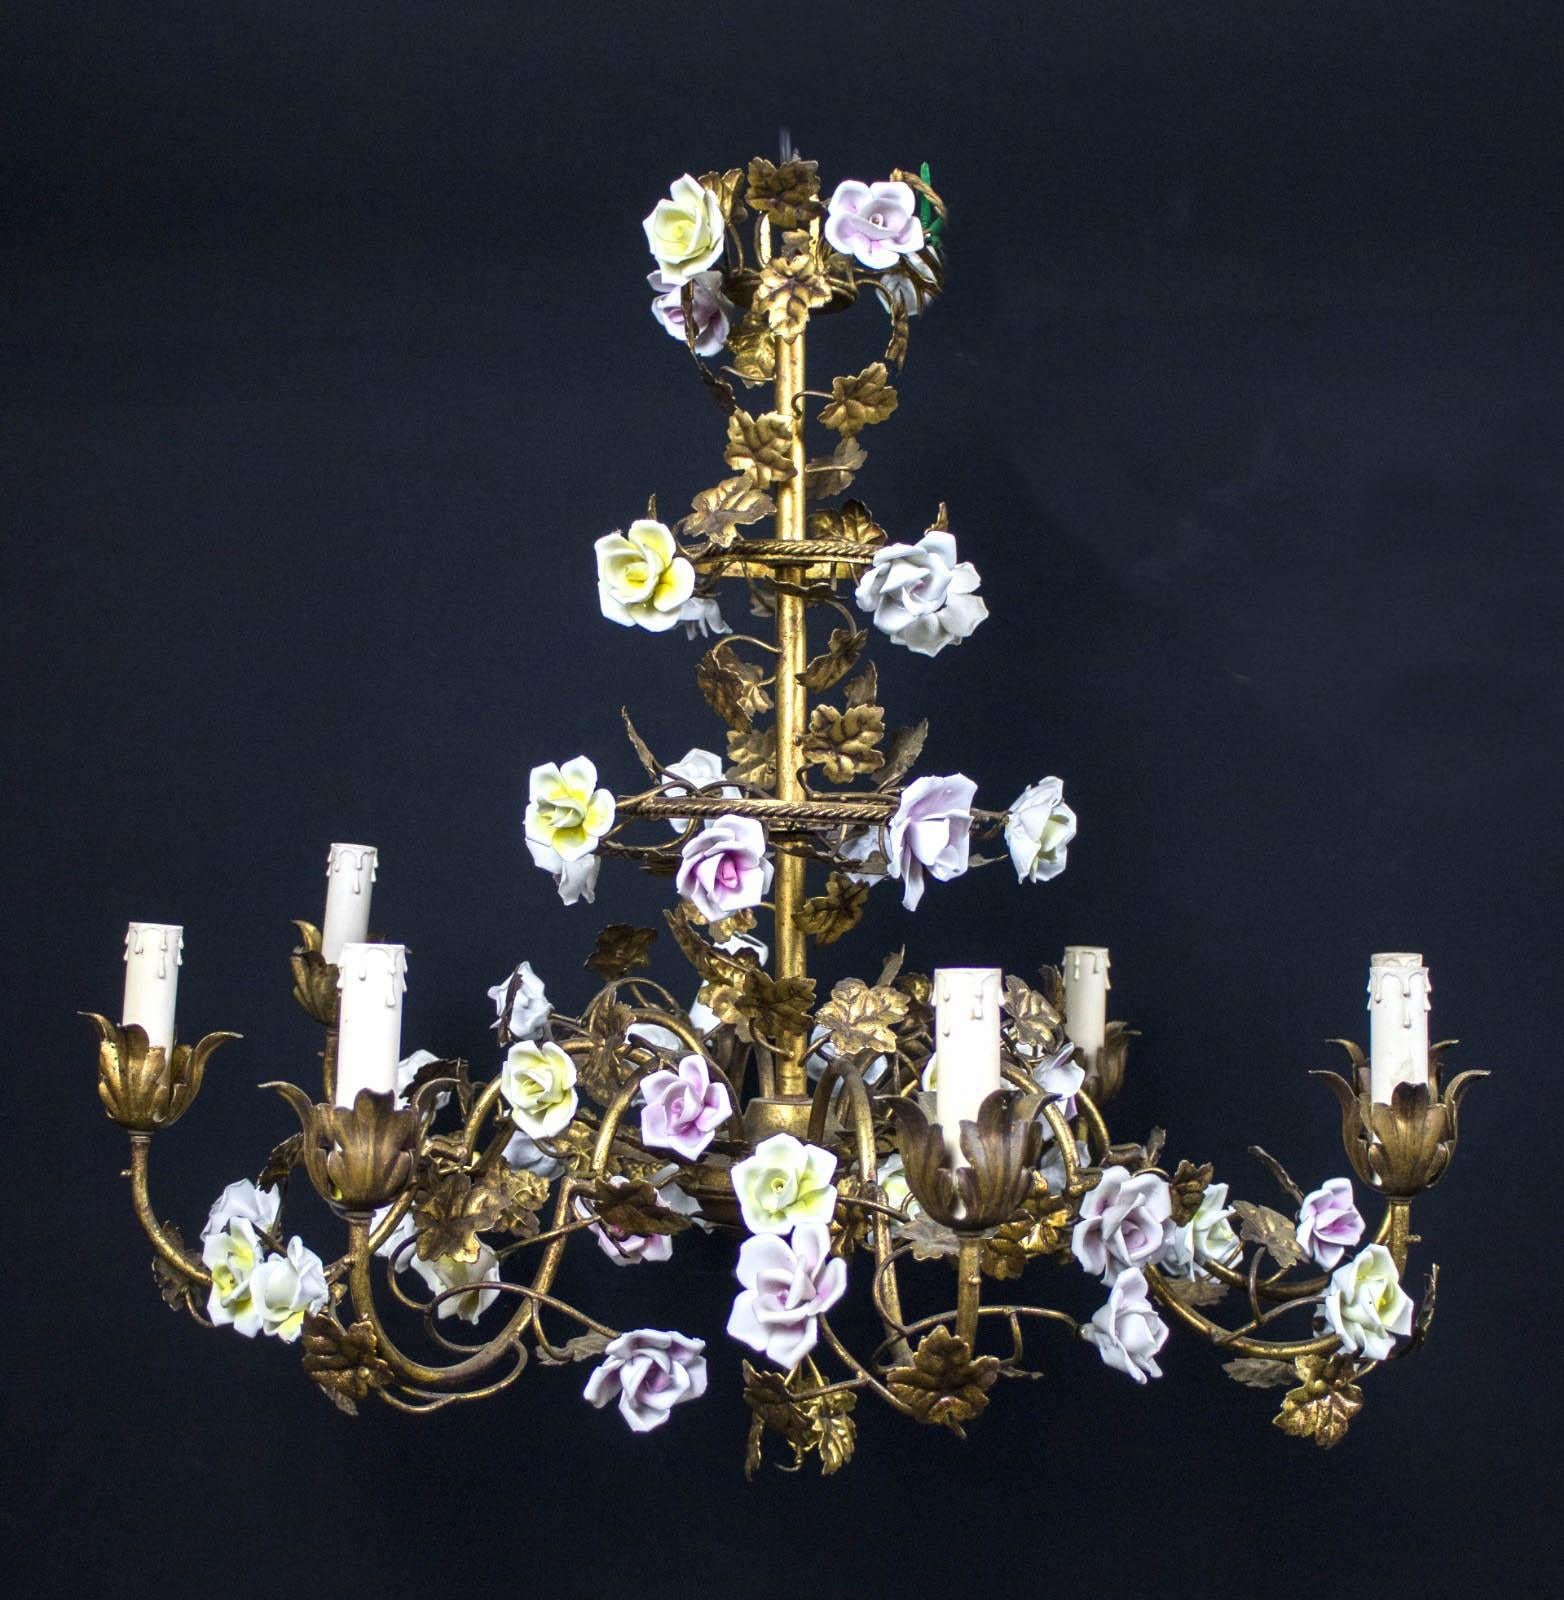 19th century Italian Piedmontese cage form chandelier ornamented with colorful porcelain flowers and hand painted tole leaves.
Six arms with six candle holders.
Hight cm 75 plus chain and canopy 120cm Diameter 80 cm 
Six E14 light bulbs, we can